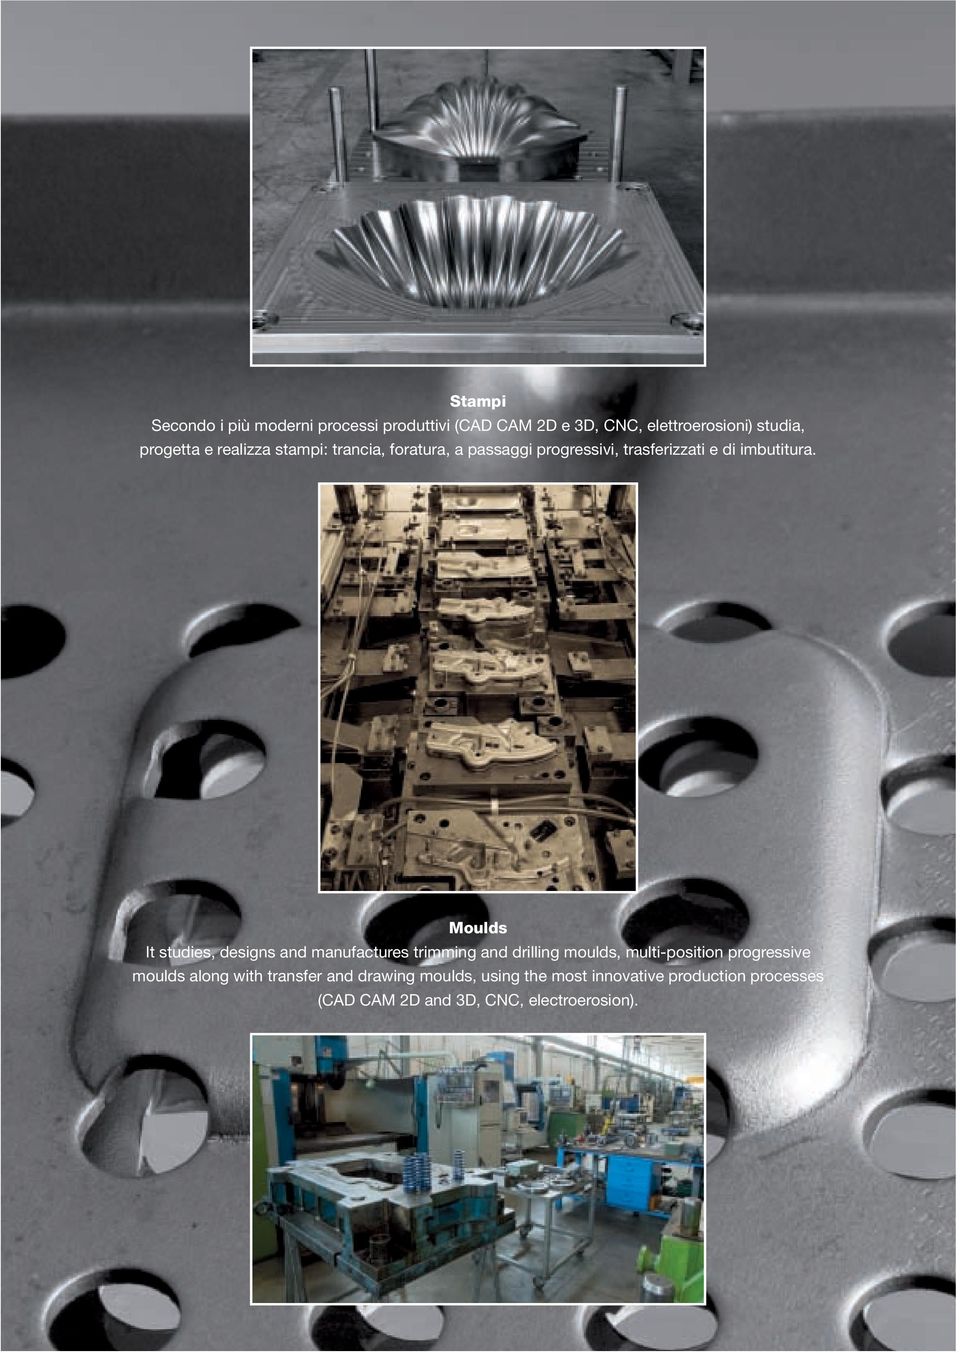 Moulds It studies, designs and manufactures trimming and drilling moulds, multi-position progressive moulds